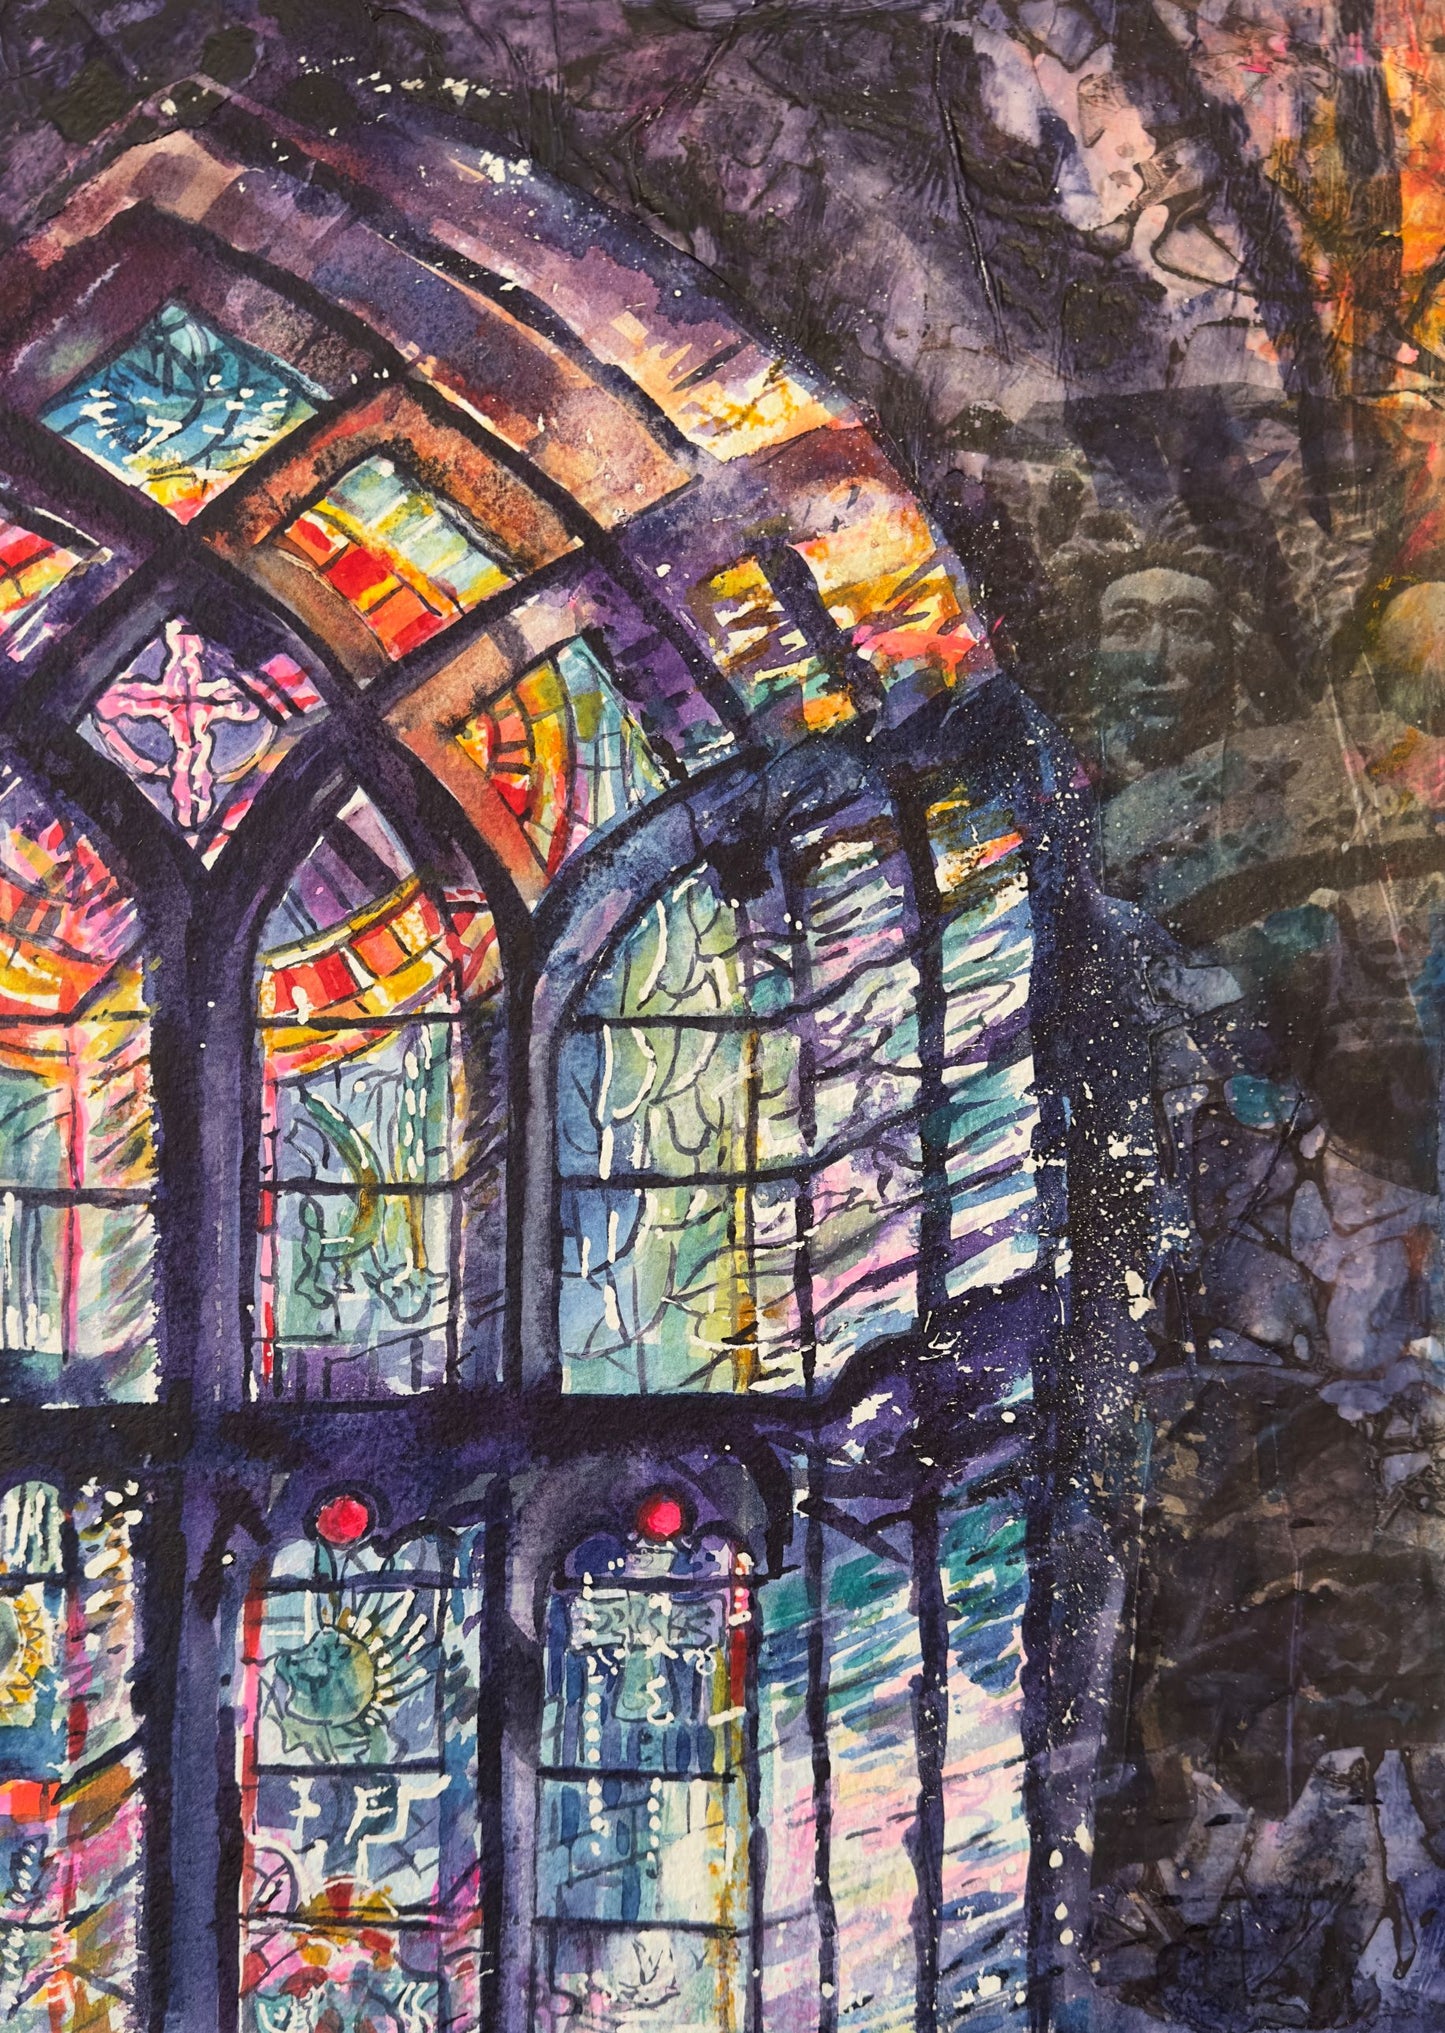 Original painting/The new window, St Magnus cathedral